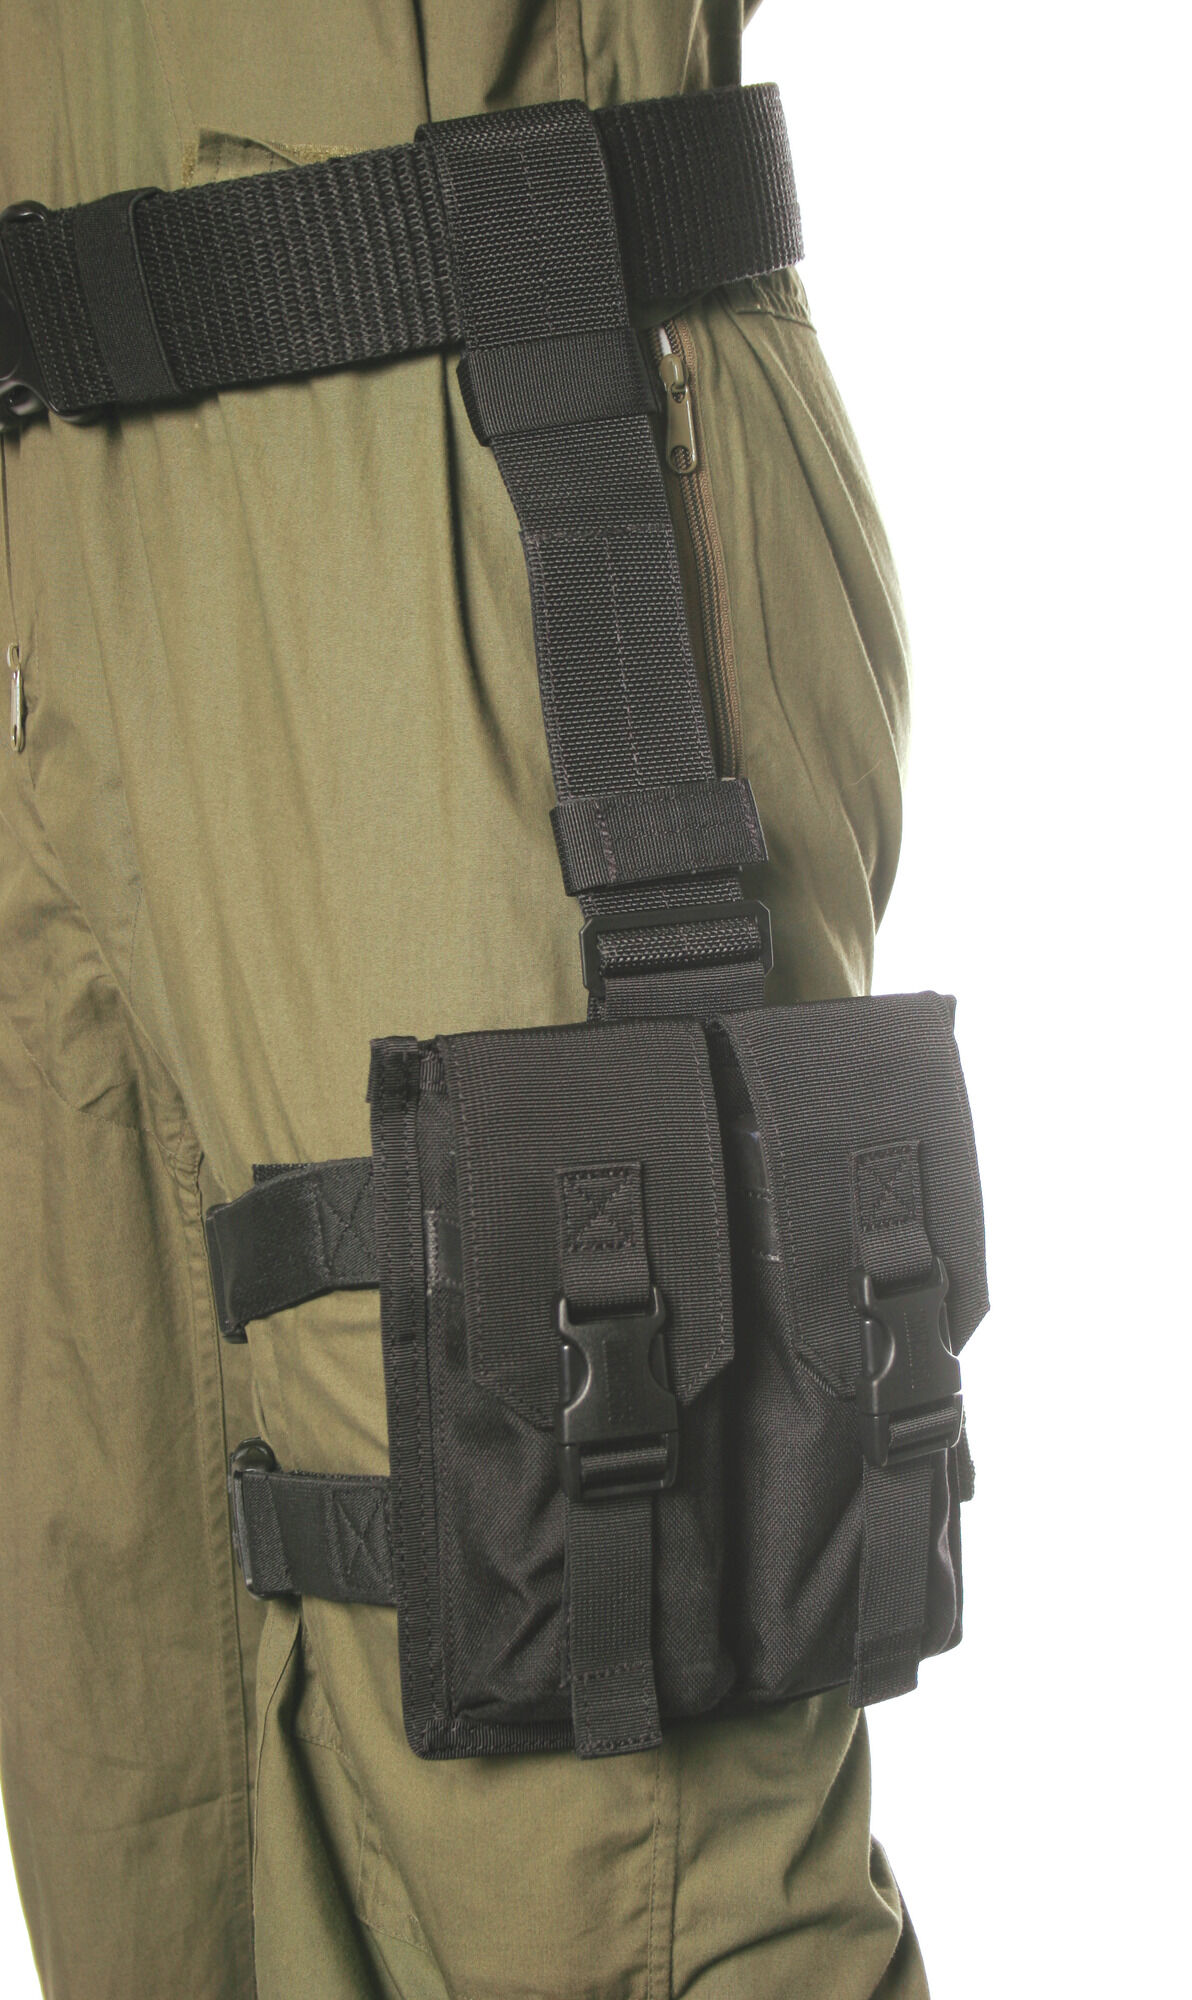 Buy Omega Elite® M16 Mag Pouch And More | Blackhawk